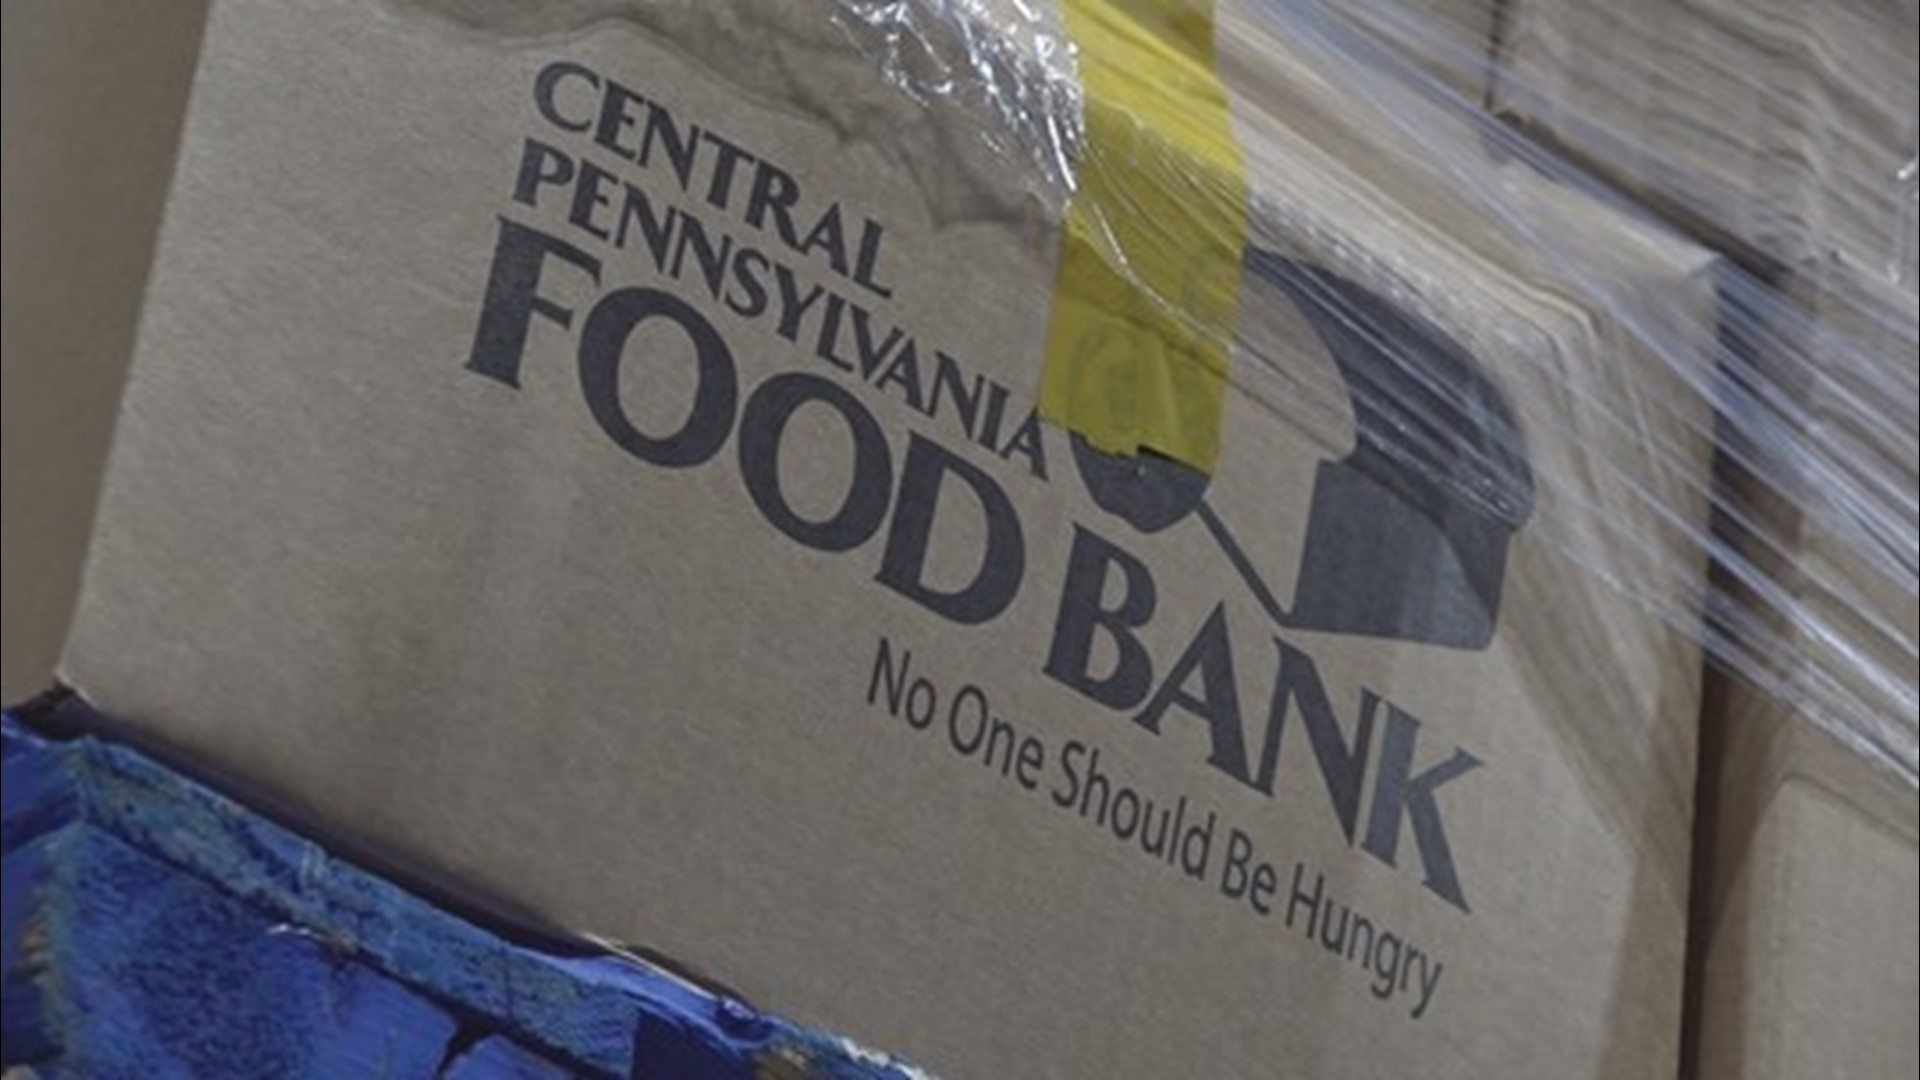 According to Feeding America, about 1 million people are facing hunger in Pennsylvania.